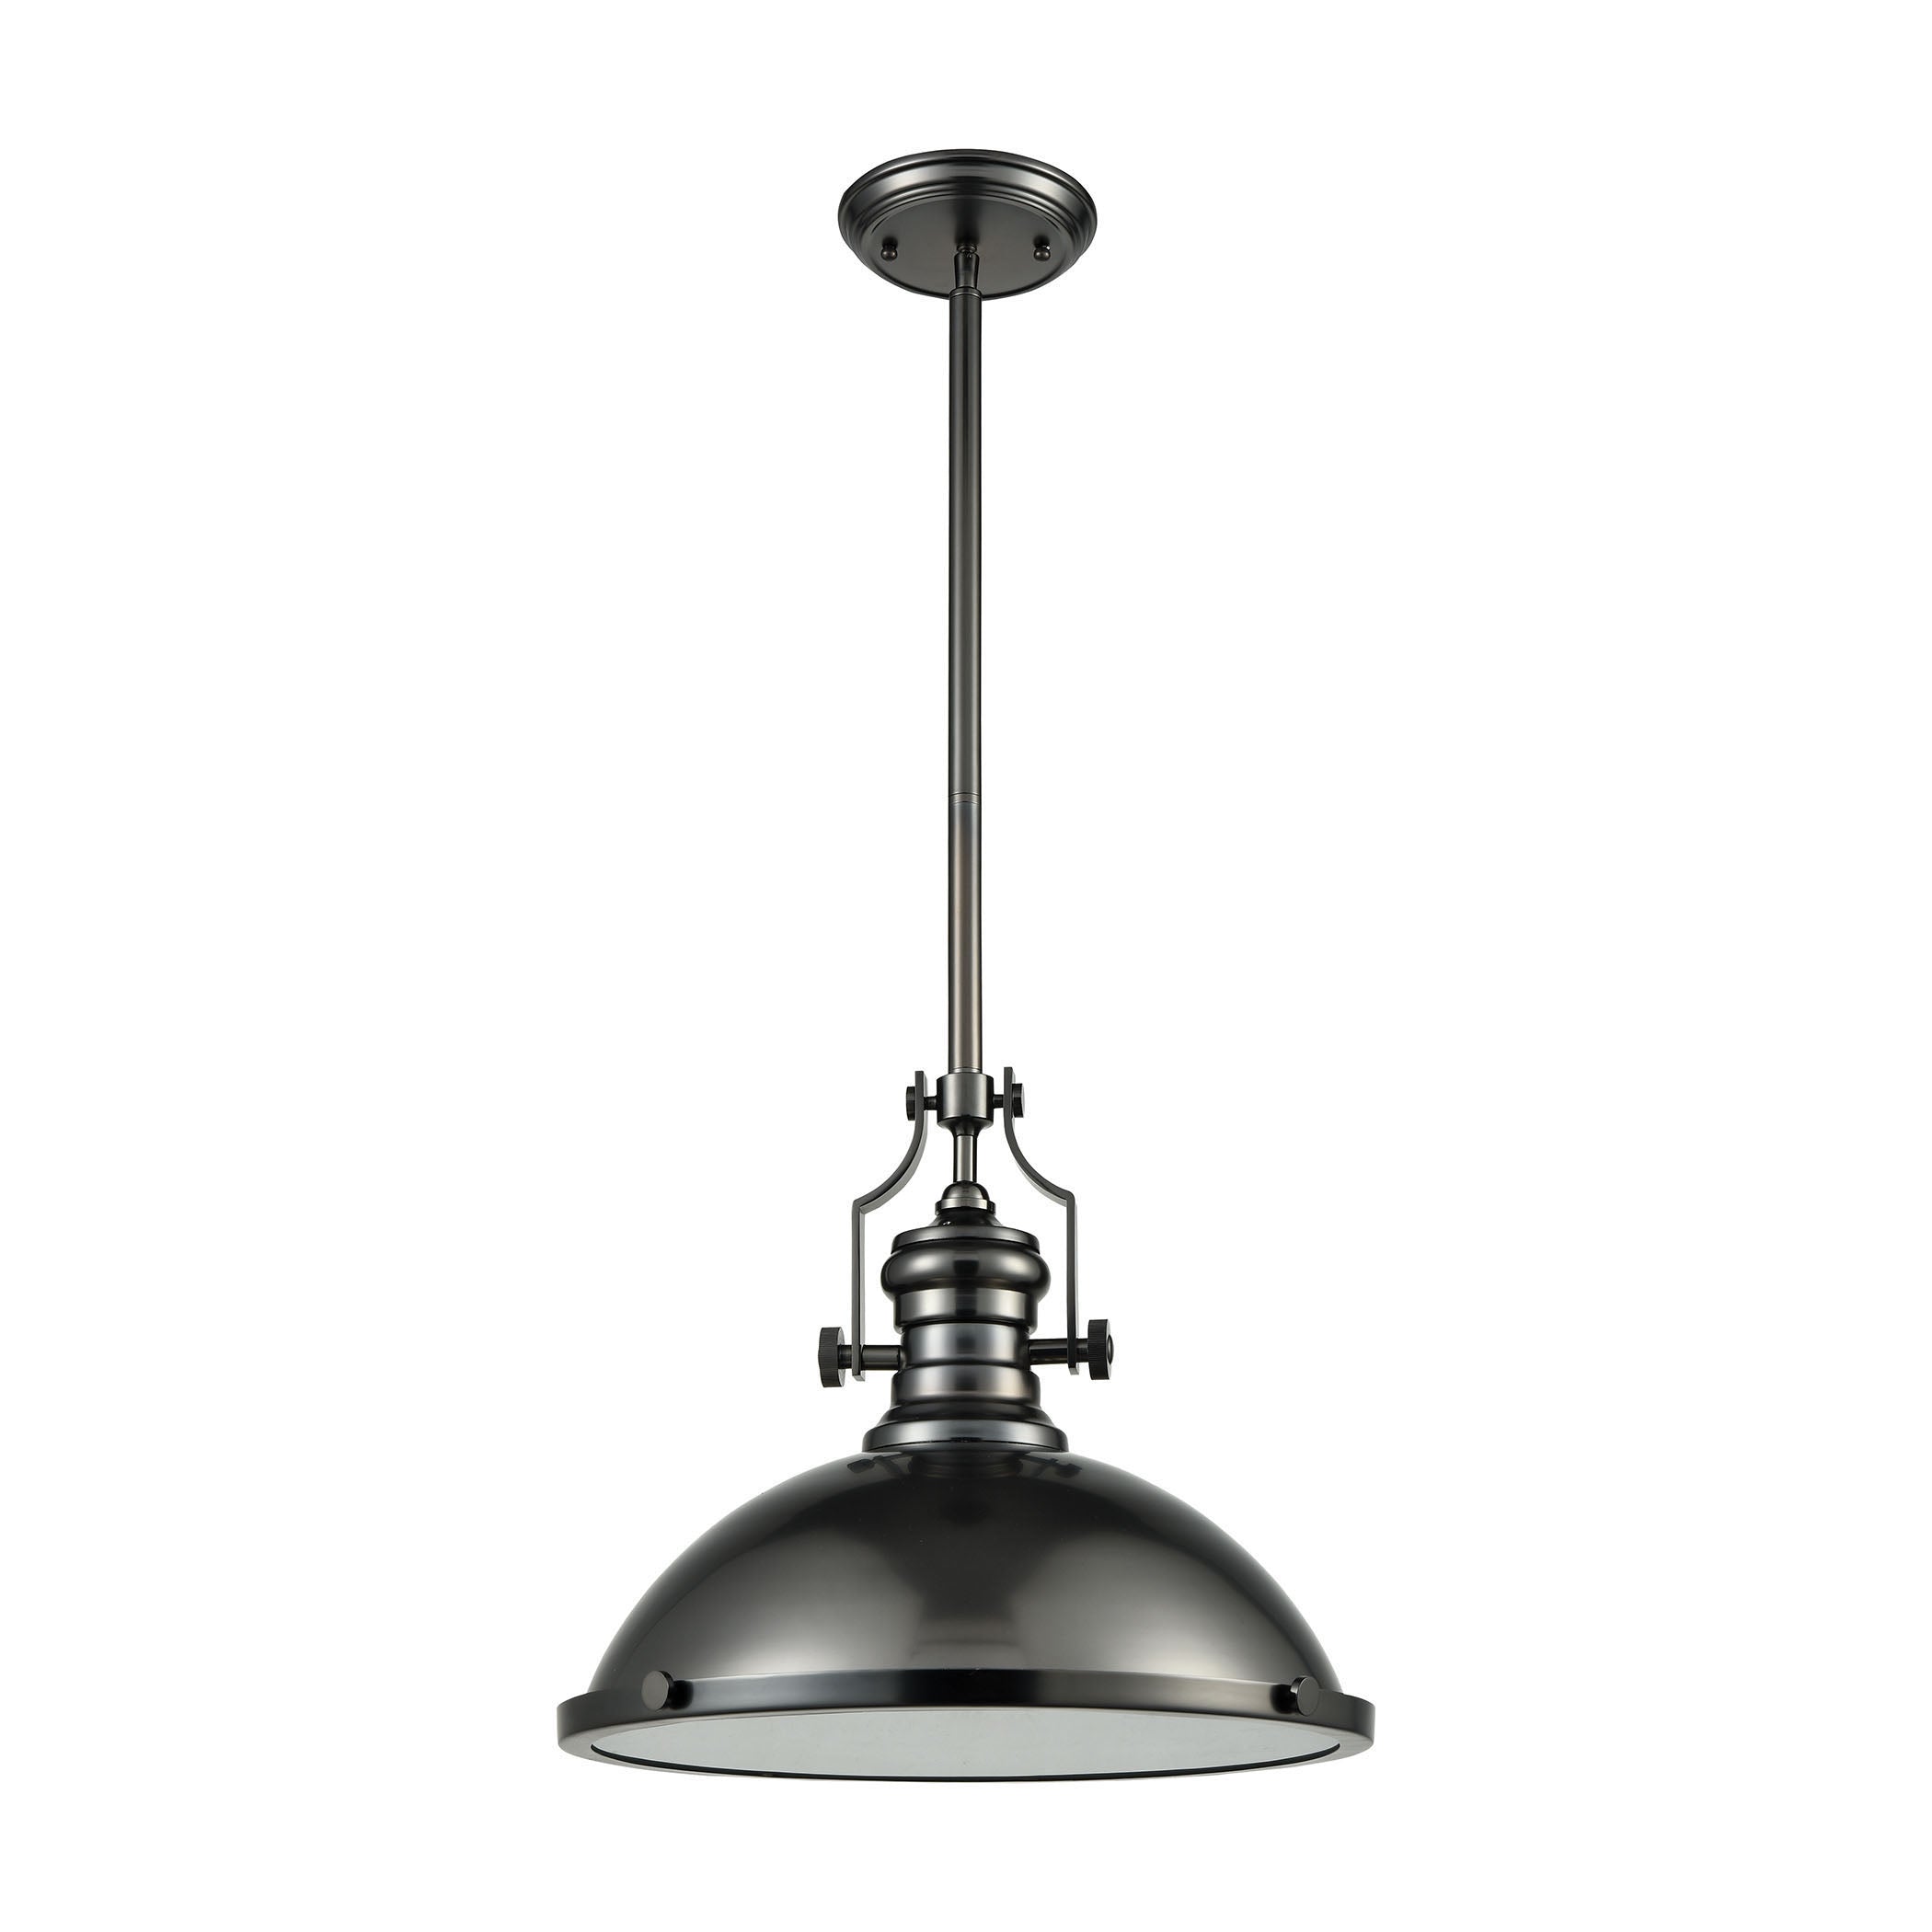 ELK Lighting 66608-1 Chadwick 1-Light Pendant in Black Nickel with Metal Shade and Frosted Glass Diffuser